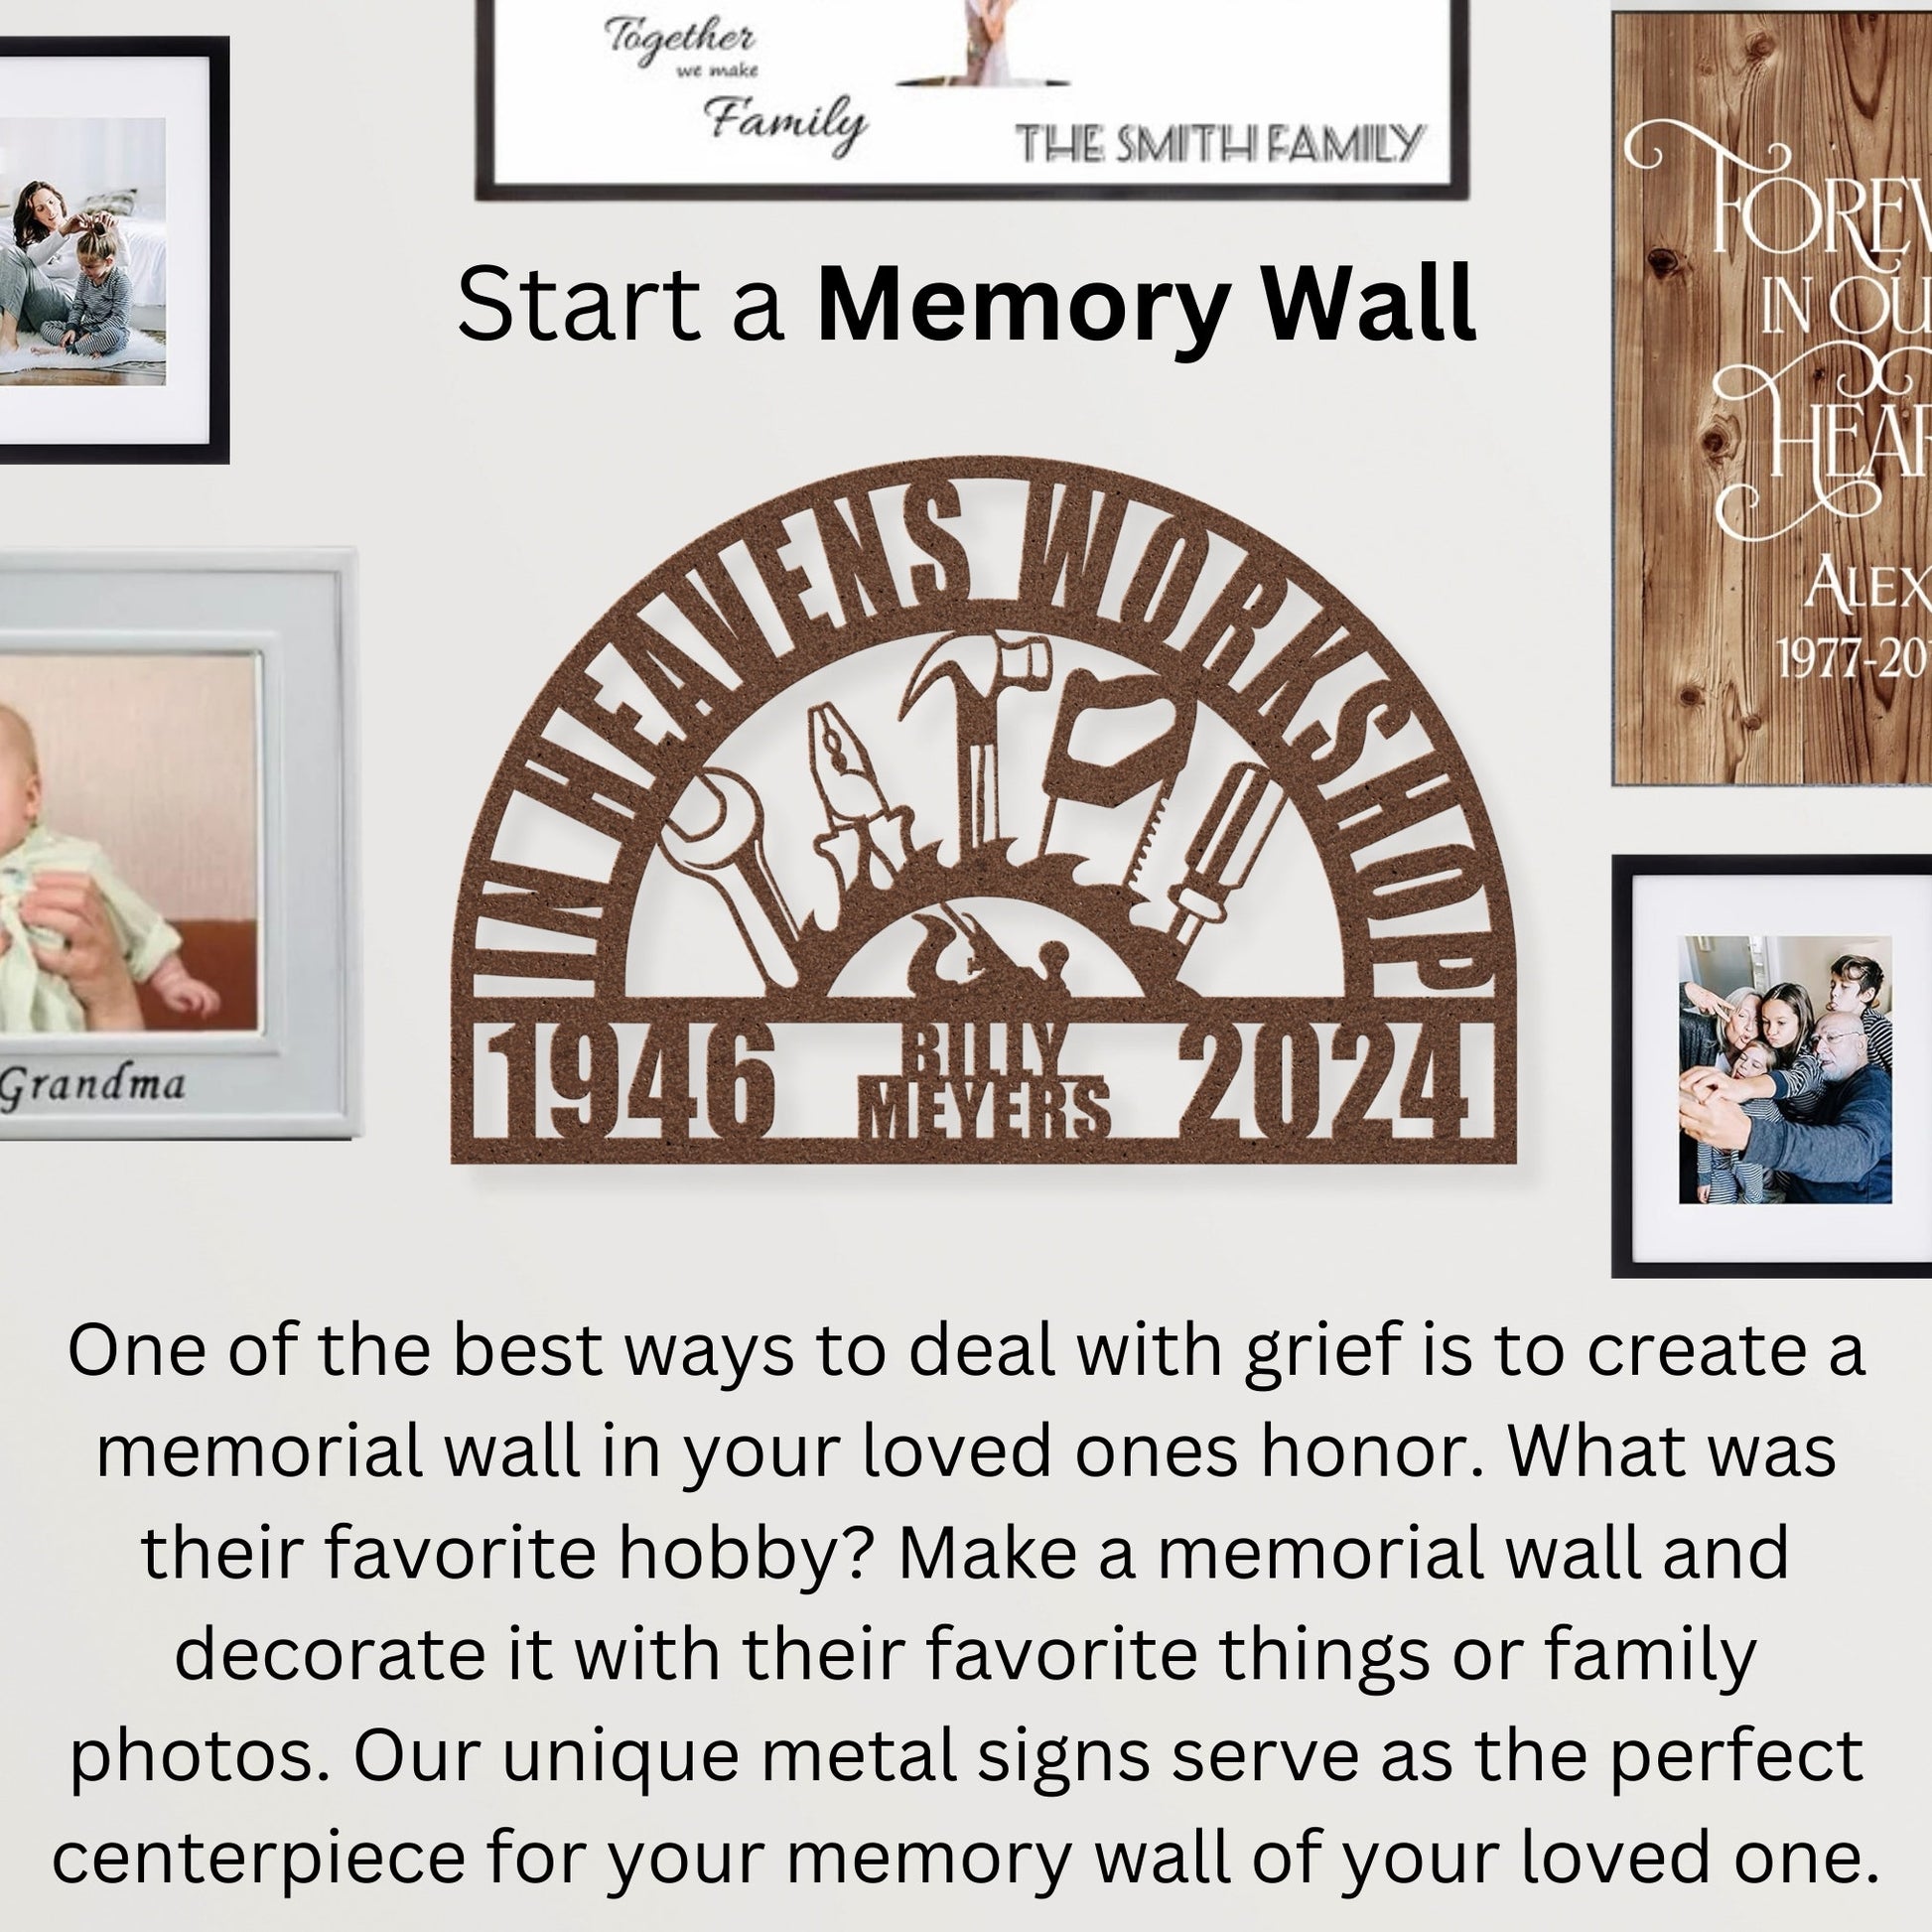 Personalized Carpenter Memorial Gift: Perfect Sympathy Gift for The Loss of Your Woodworker